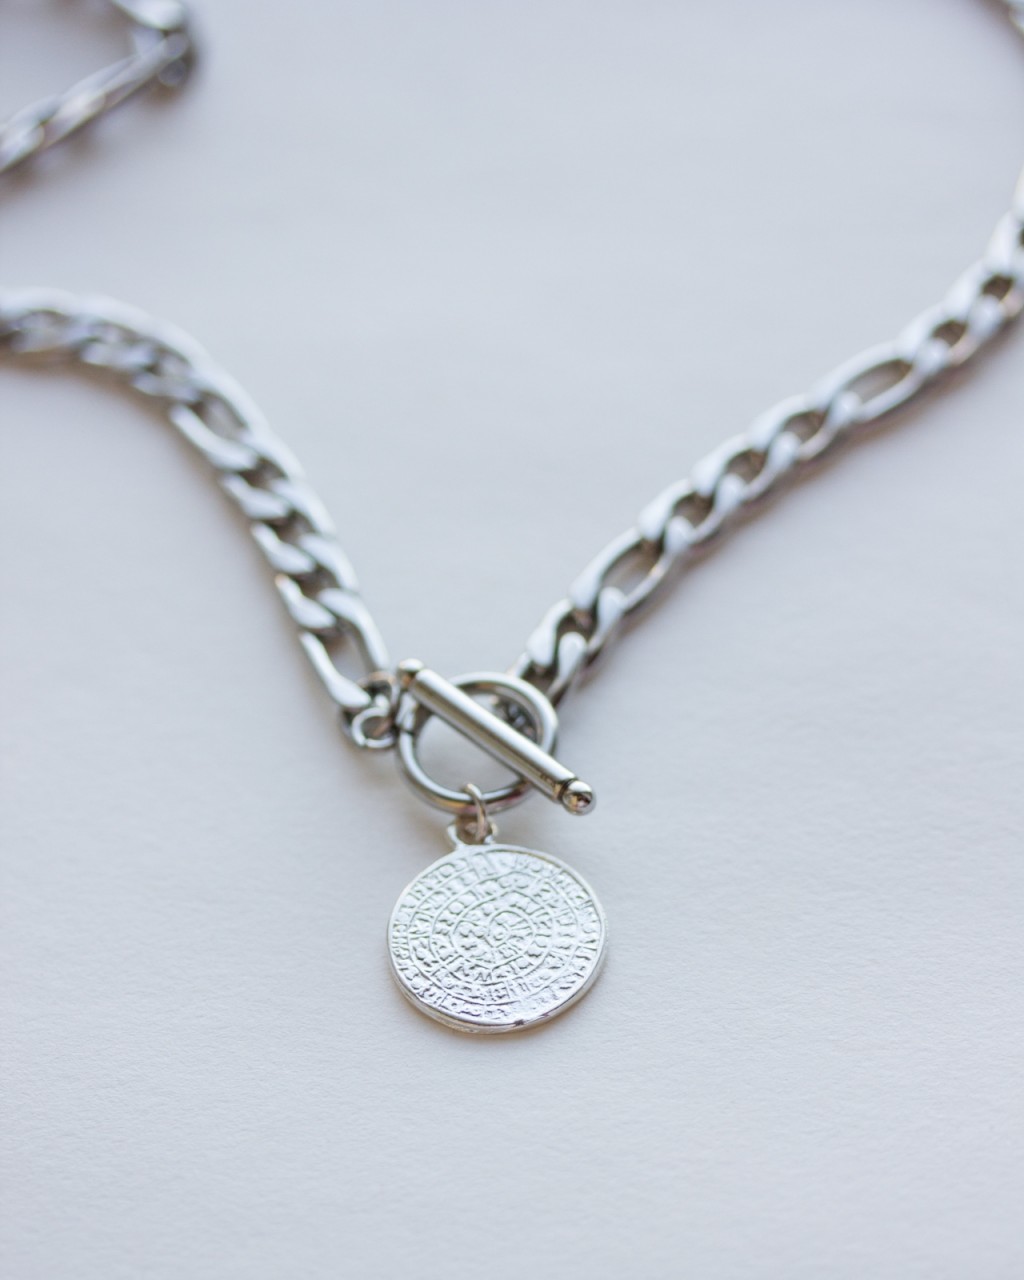 Silver Toggle Necklace